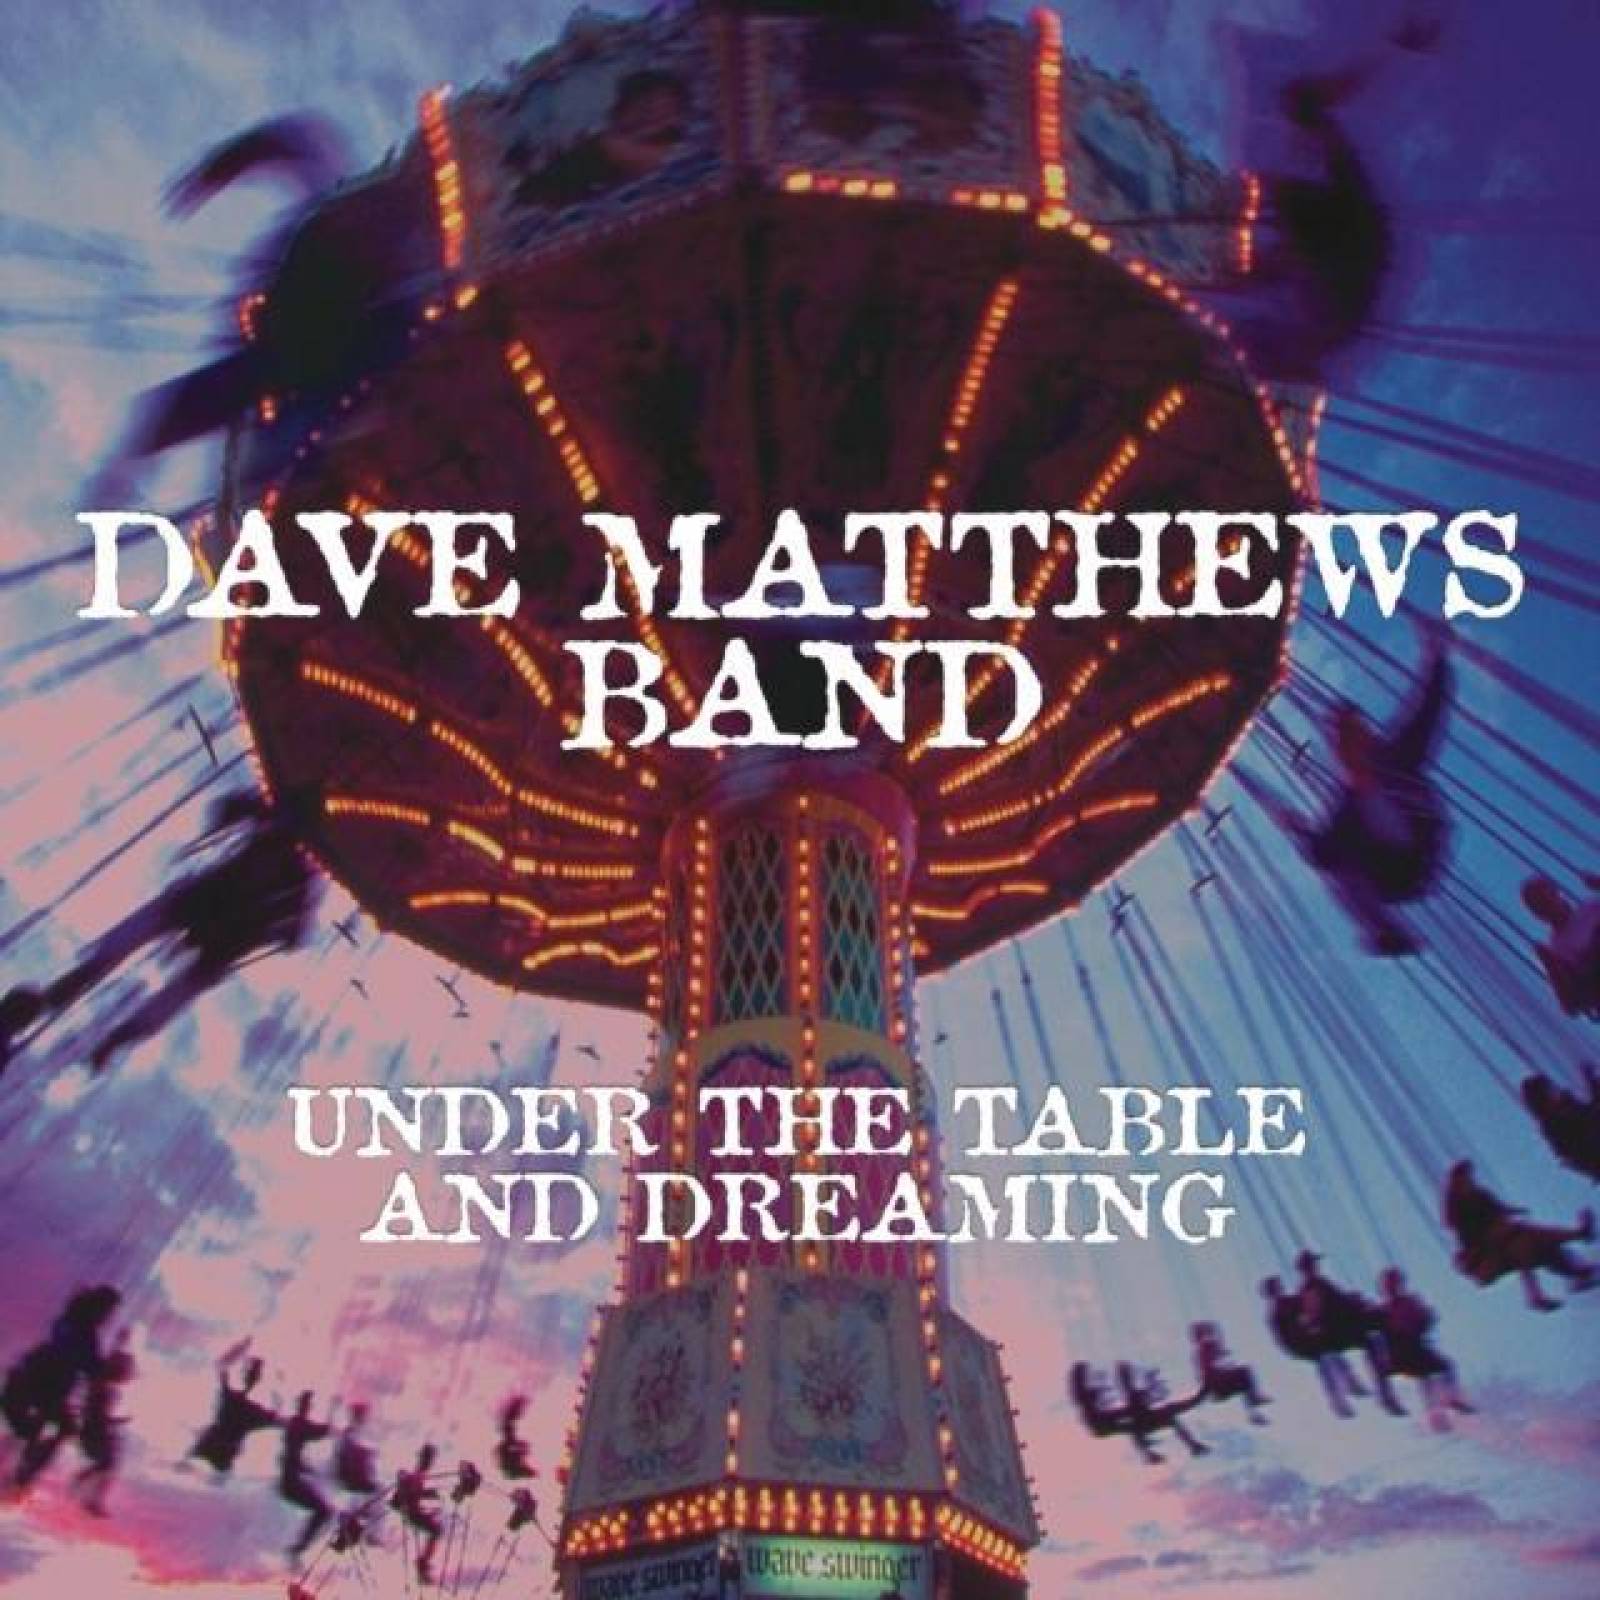 Dave Matthews Band: Under The Table And Dreaming Vinilo 